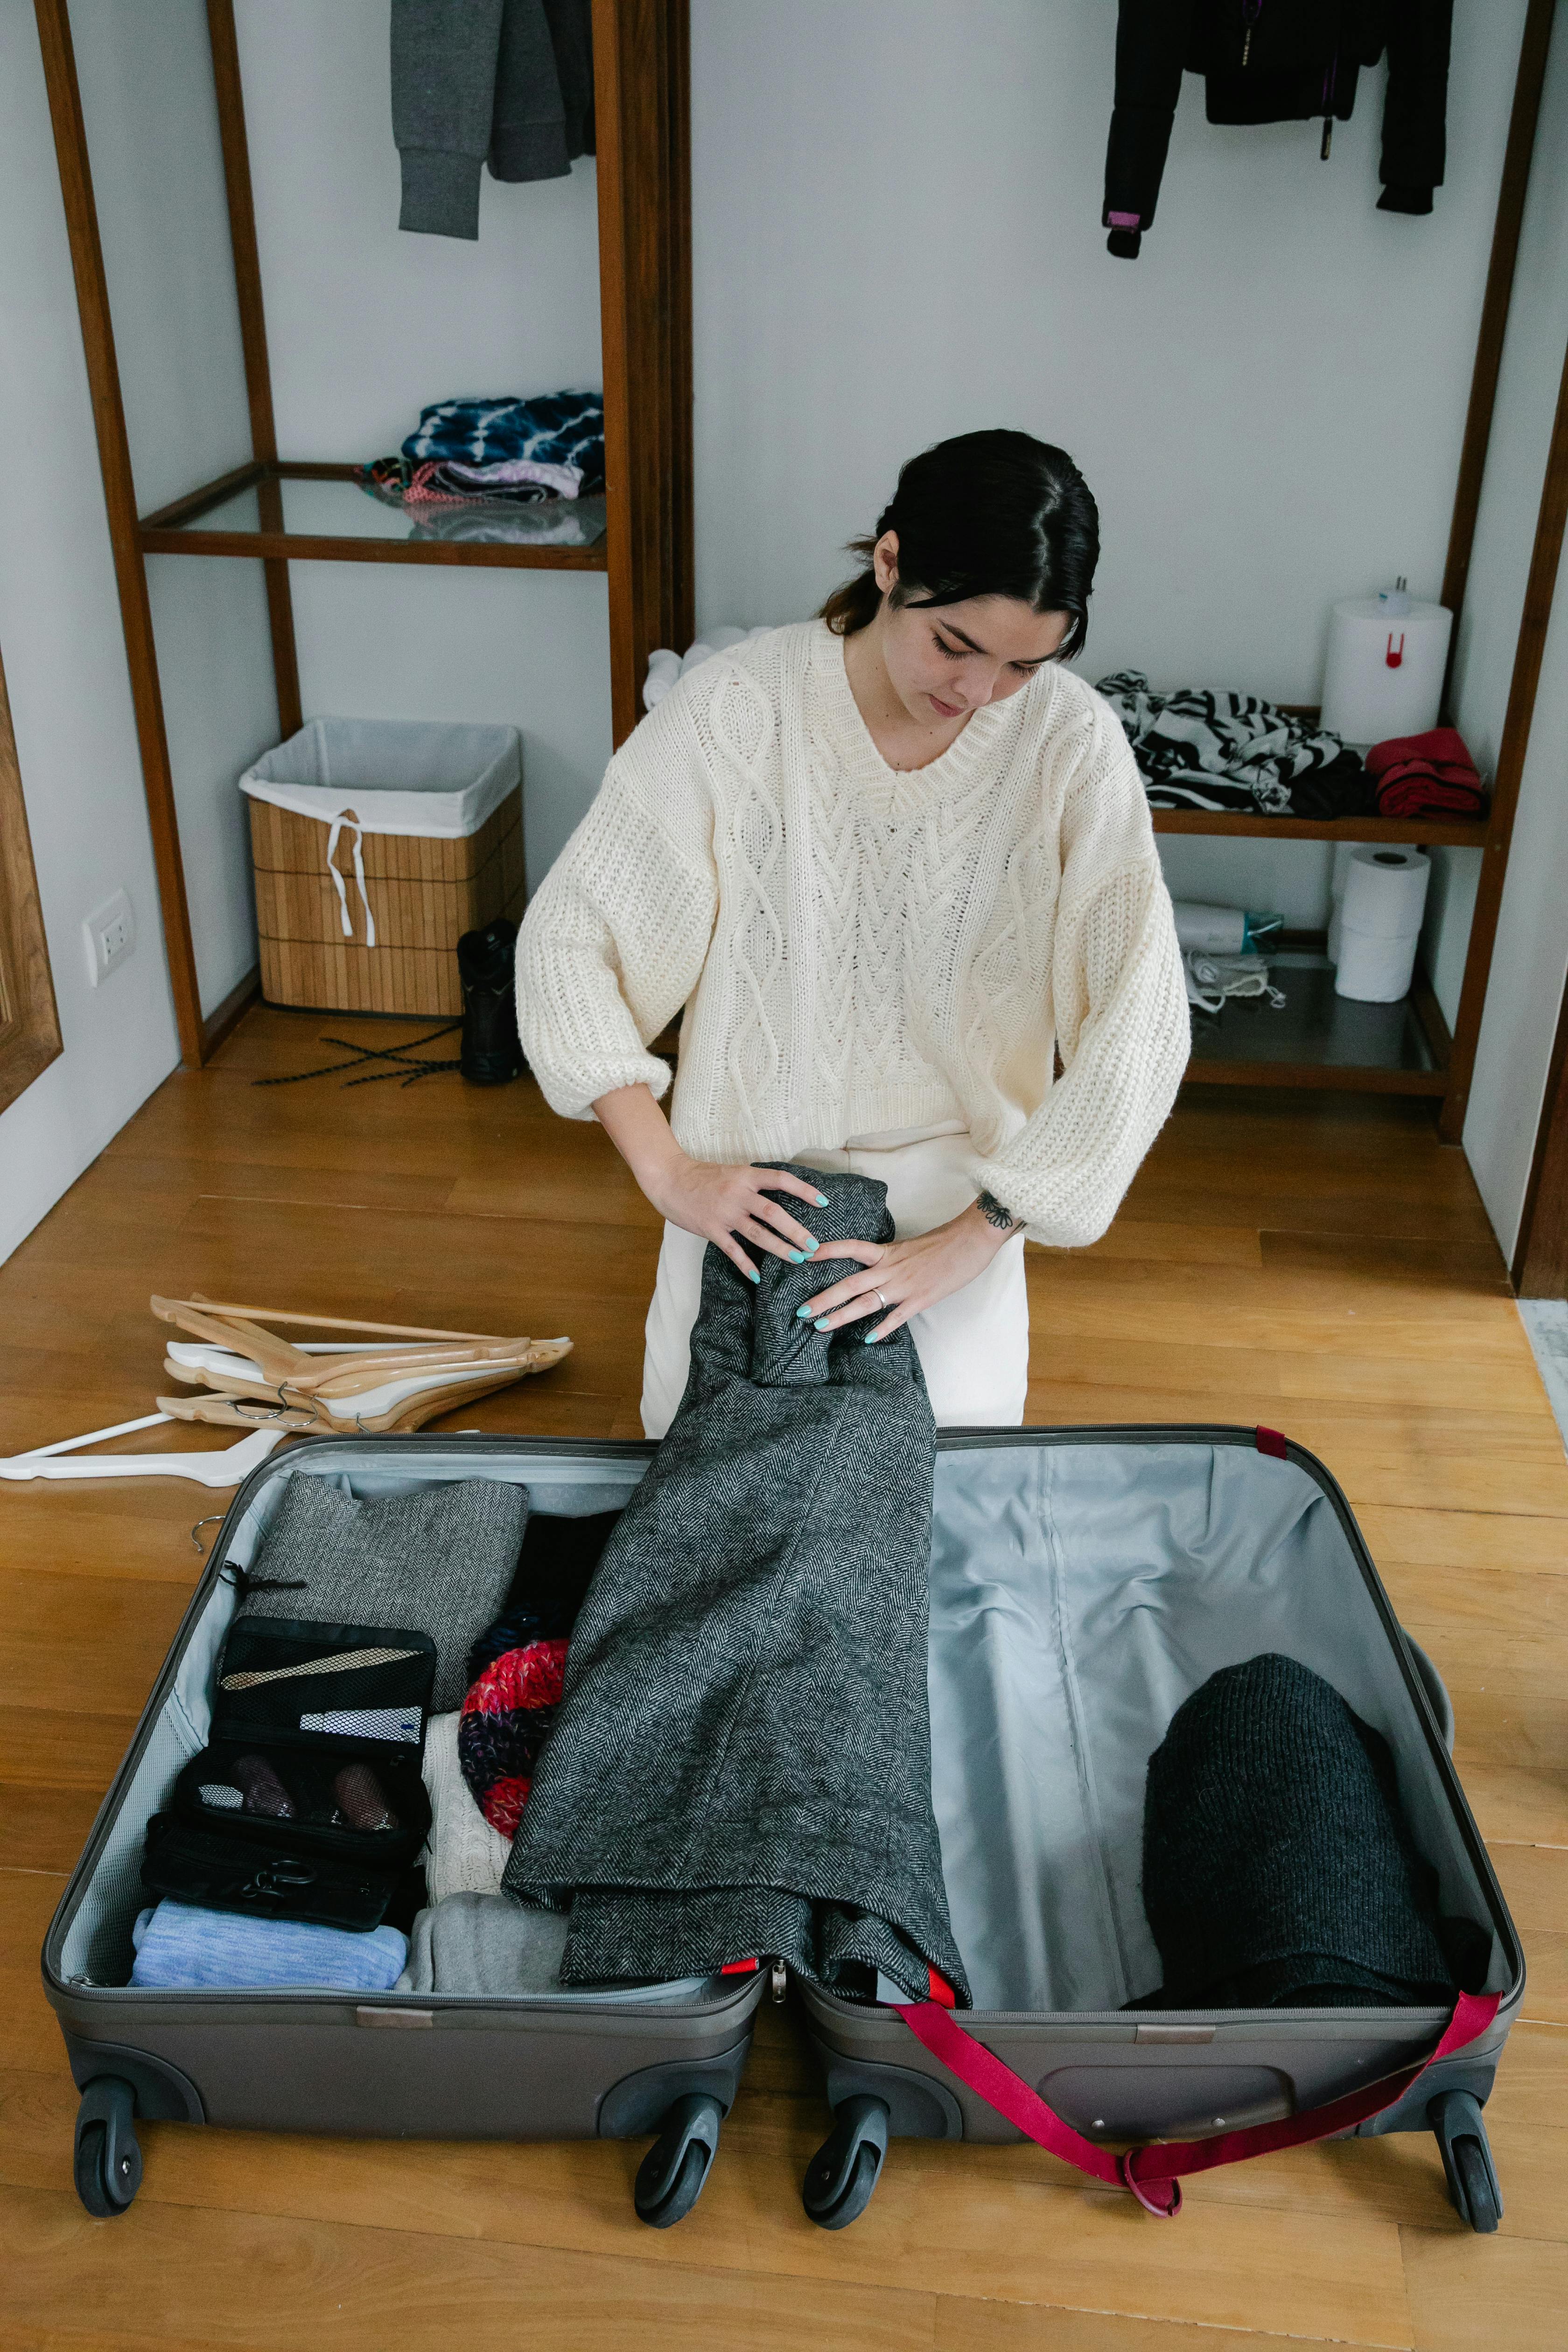 A Woman Packing Her Suitcase · Free Stock Photo